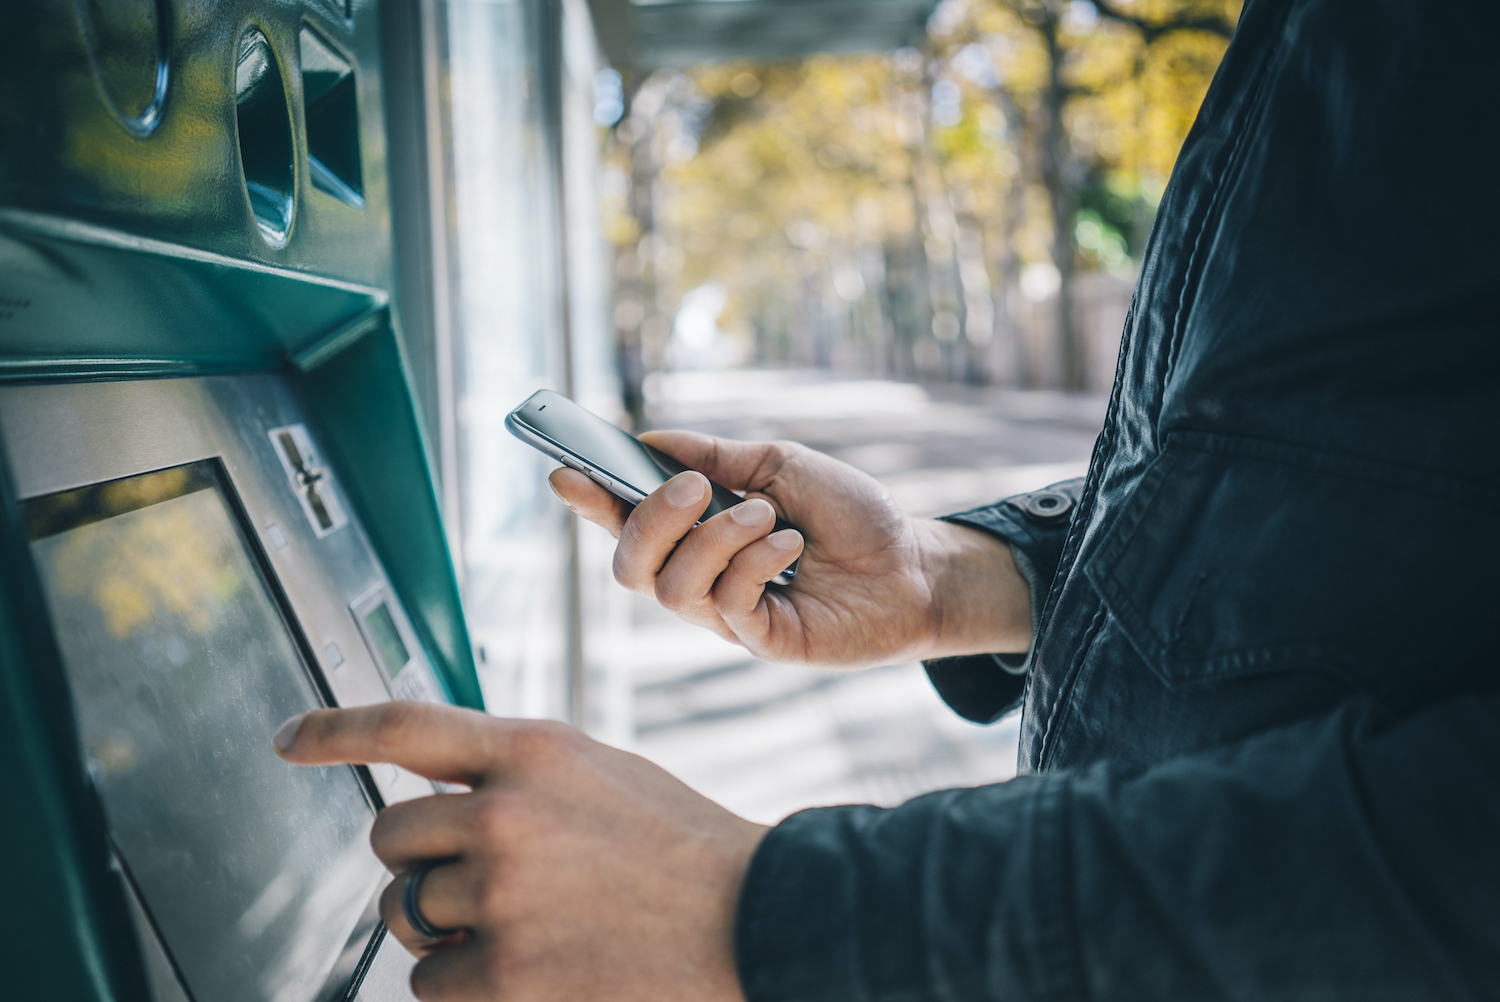 A person signs into their bank account at an ATM. Read the full blog to learn about the trends we’ve identified in Banking in 2022.